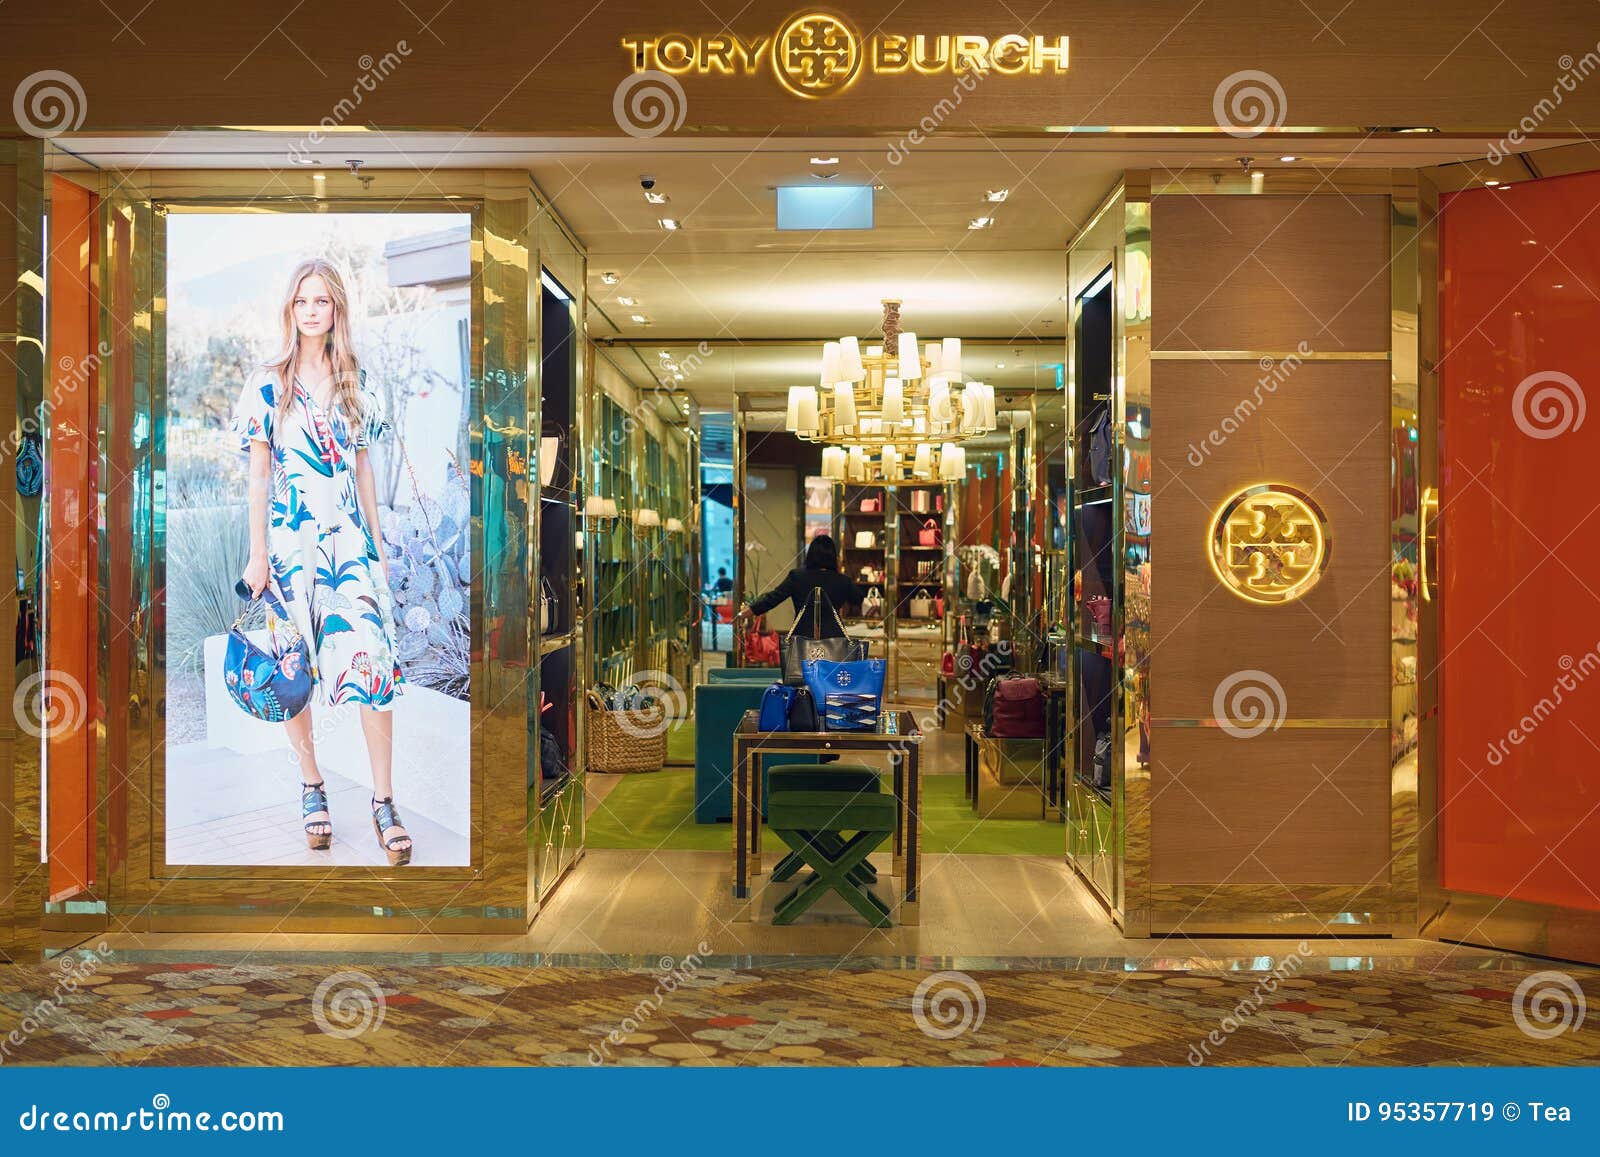 Tory Burch store editorial stock image. Image of indoor - 95357719